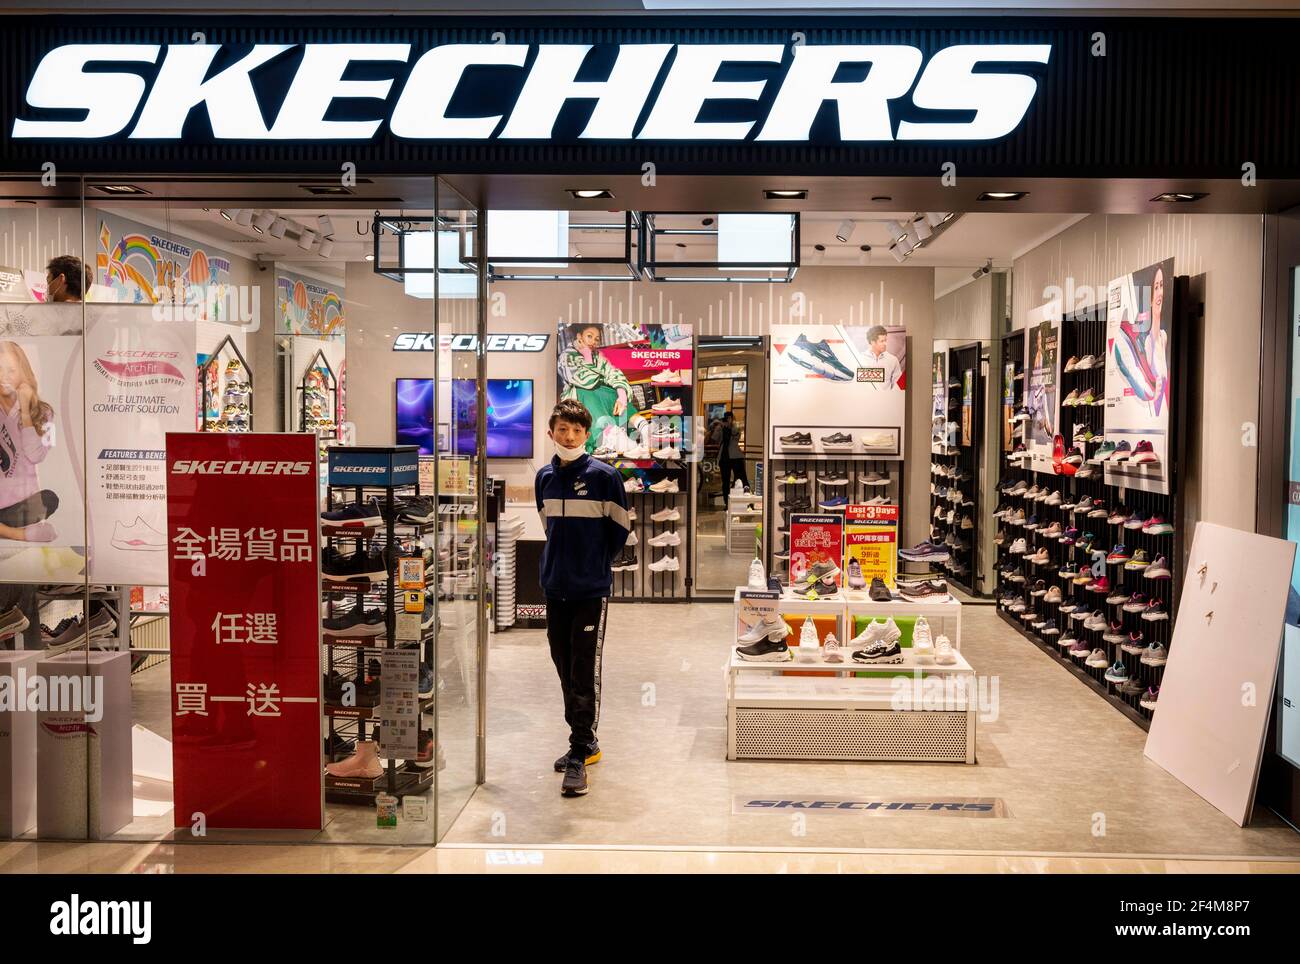 American lifestyle and performance footwear brand, Skechers store seen in  Hong Kong Stock Photo - Alamy